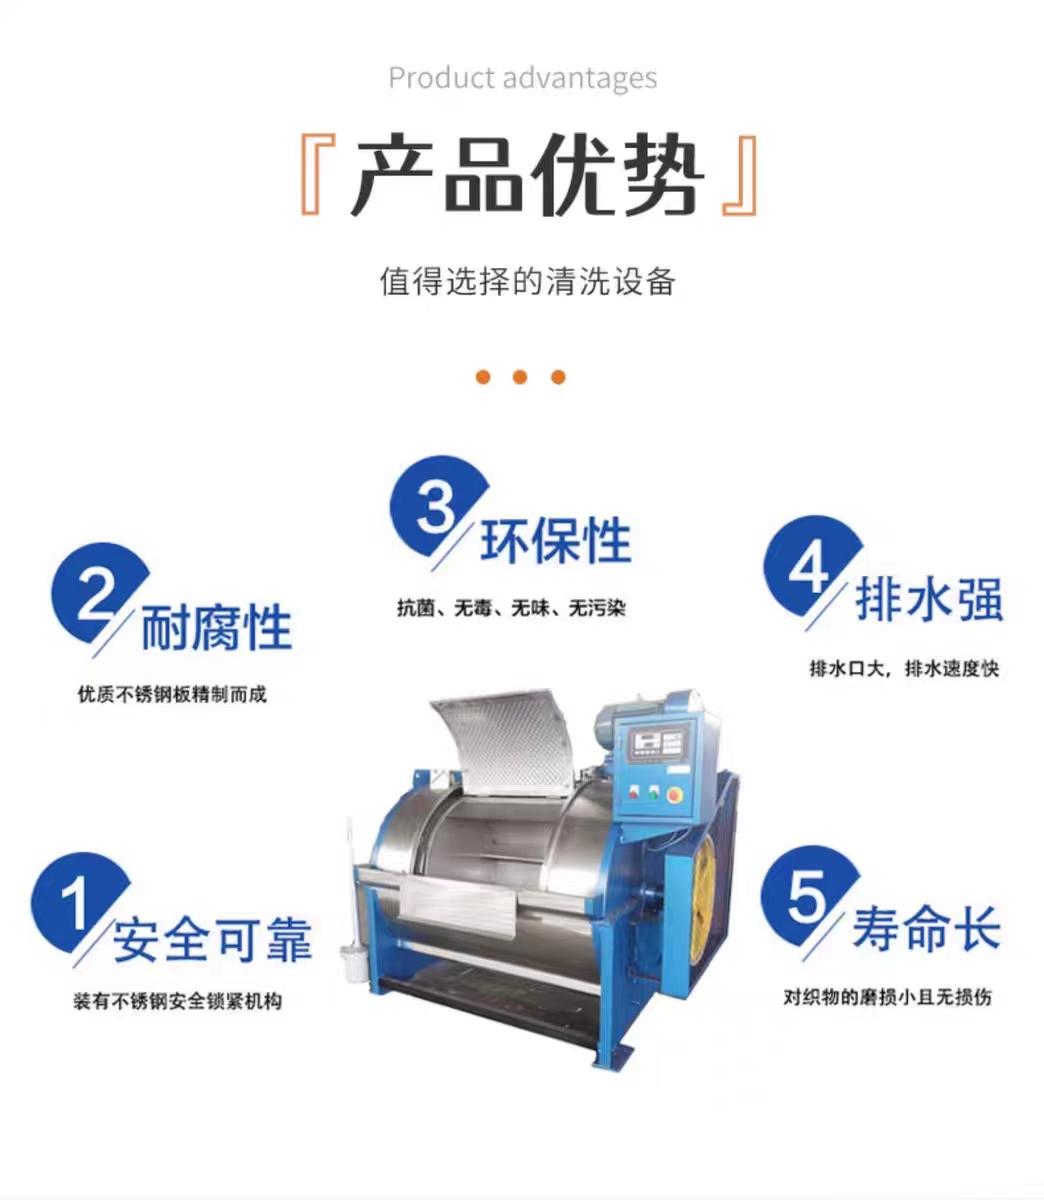 Commercial large stainless steel industrial washing machine, 100 kg horizontal work clothes cleaning machine